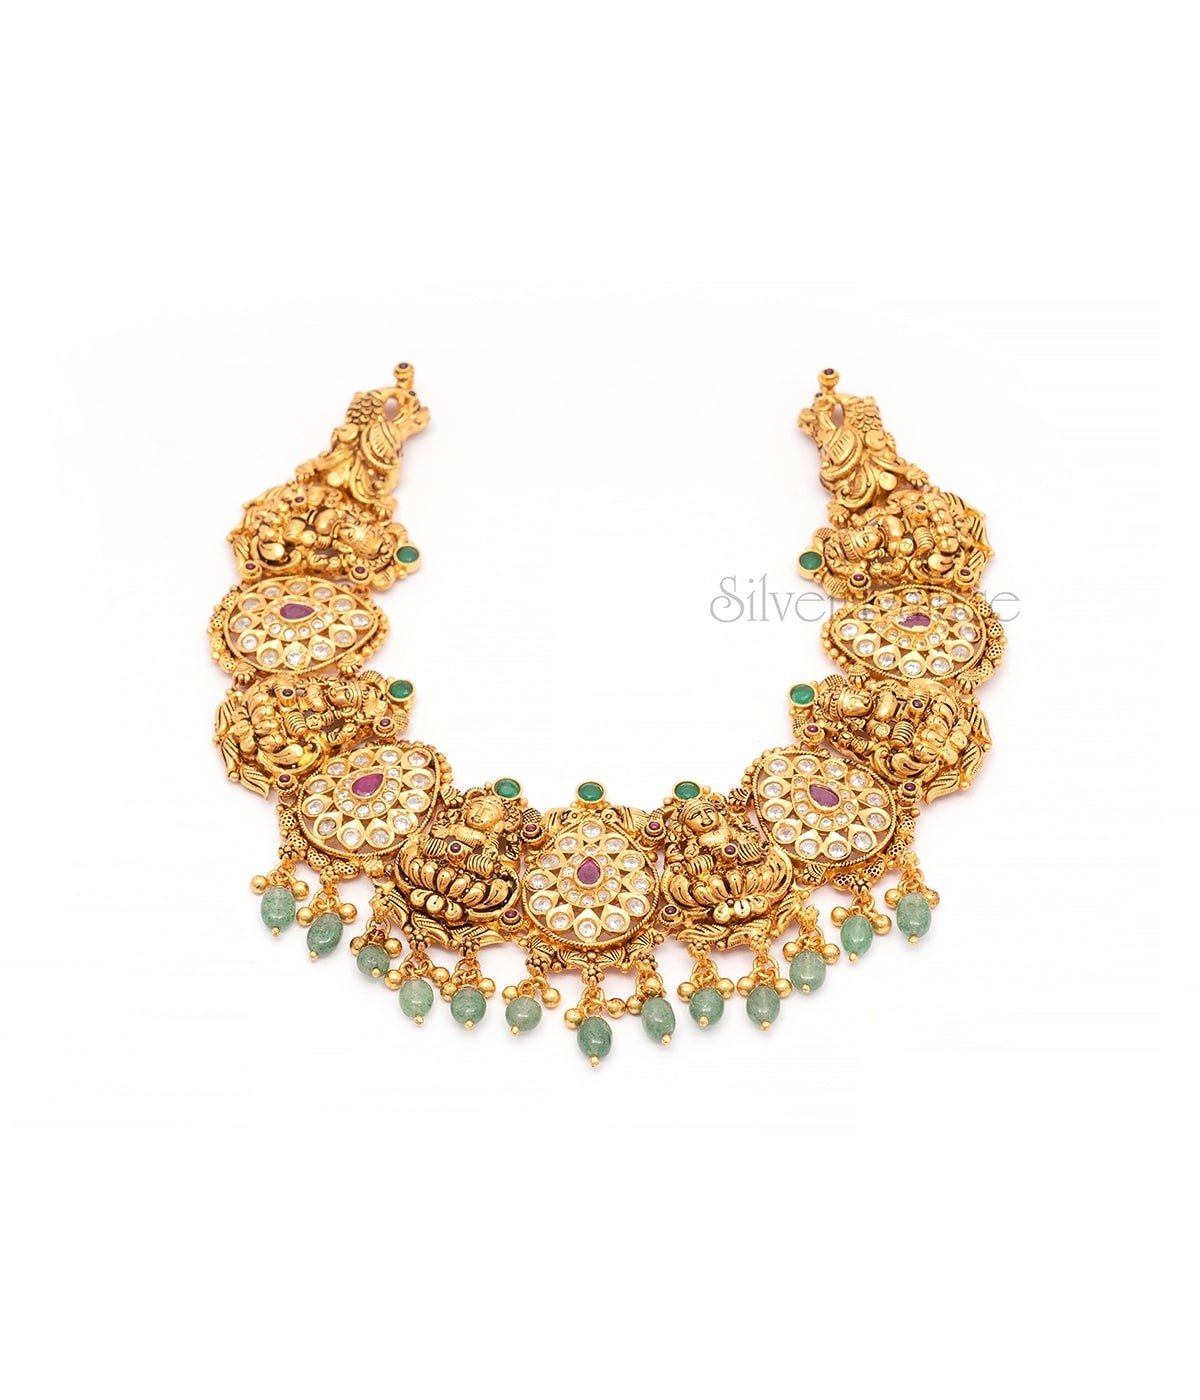 GOLD PLATED KUNDAN STONE AND LAKSHMI NECKLACE